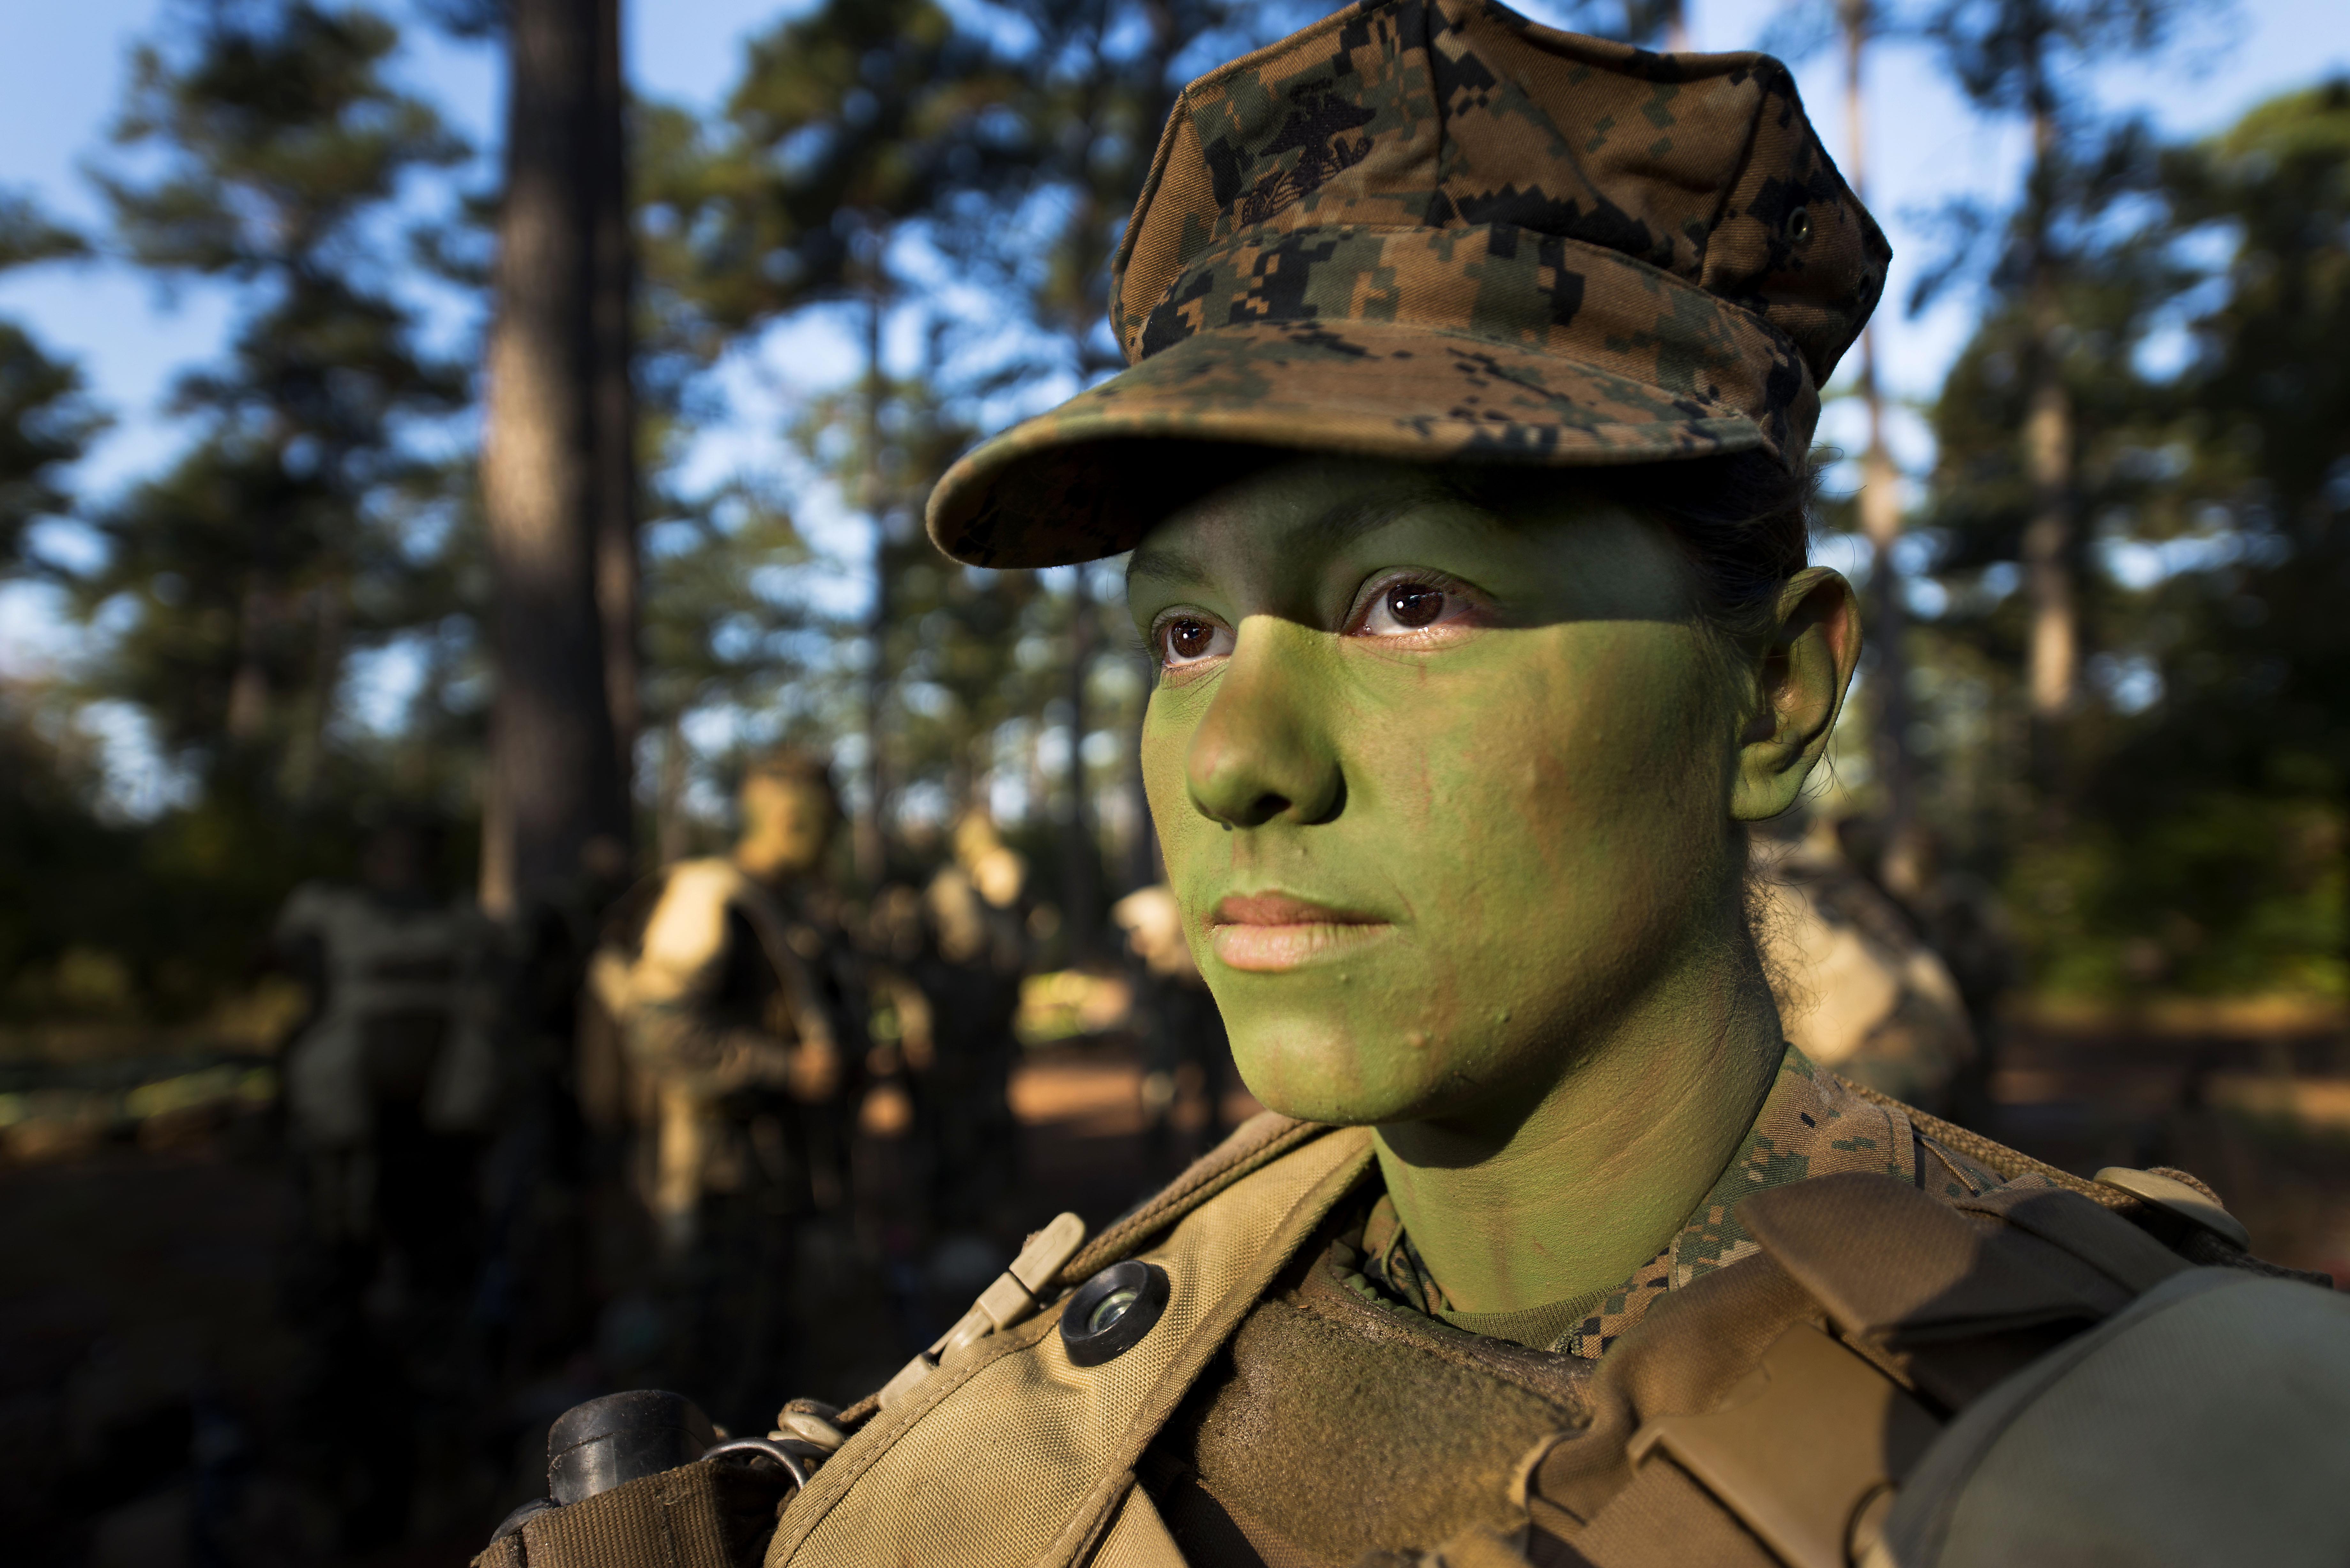  Pfc. Christina Fuentes Montenegro prepares to hike to her platoon's defensive position during patrol week of Infantry Training Battalion near Camp Geiger, N.C. on Oct. 31, 2013. US Marine Corps Photo